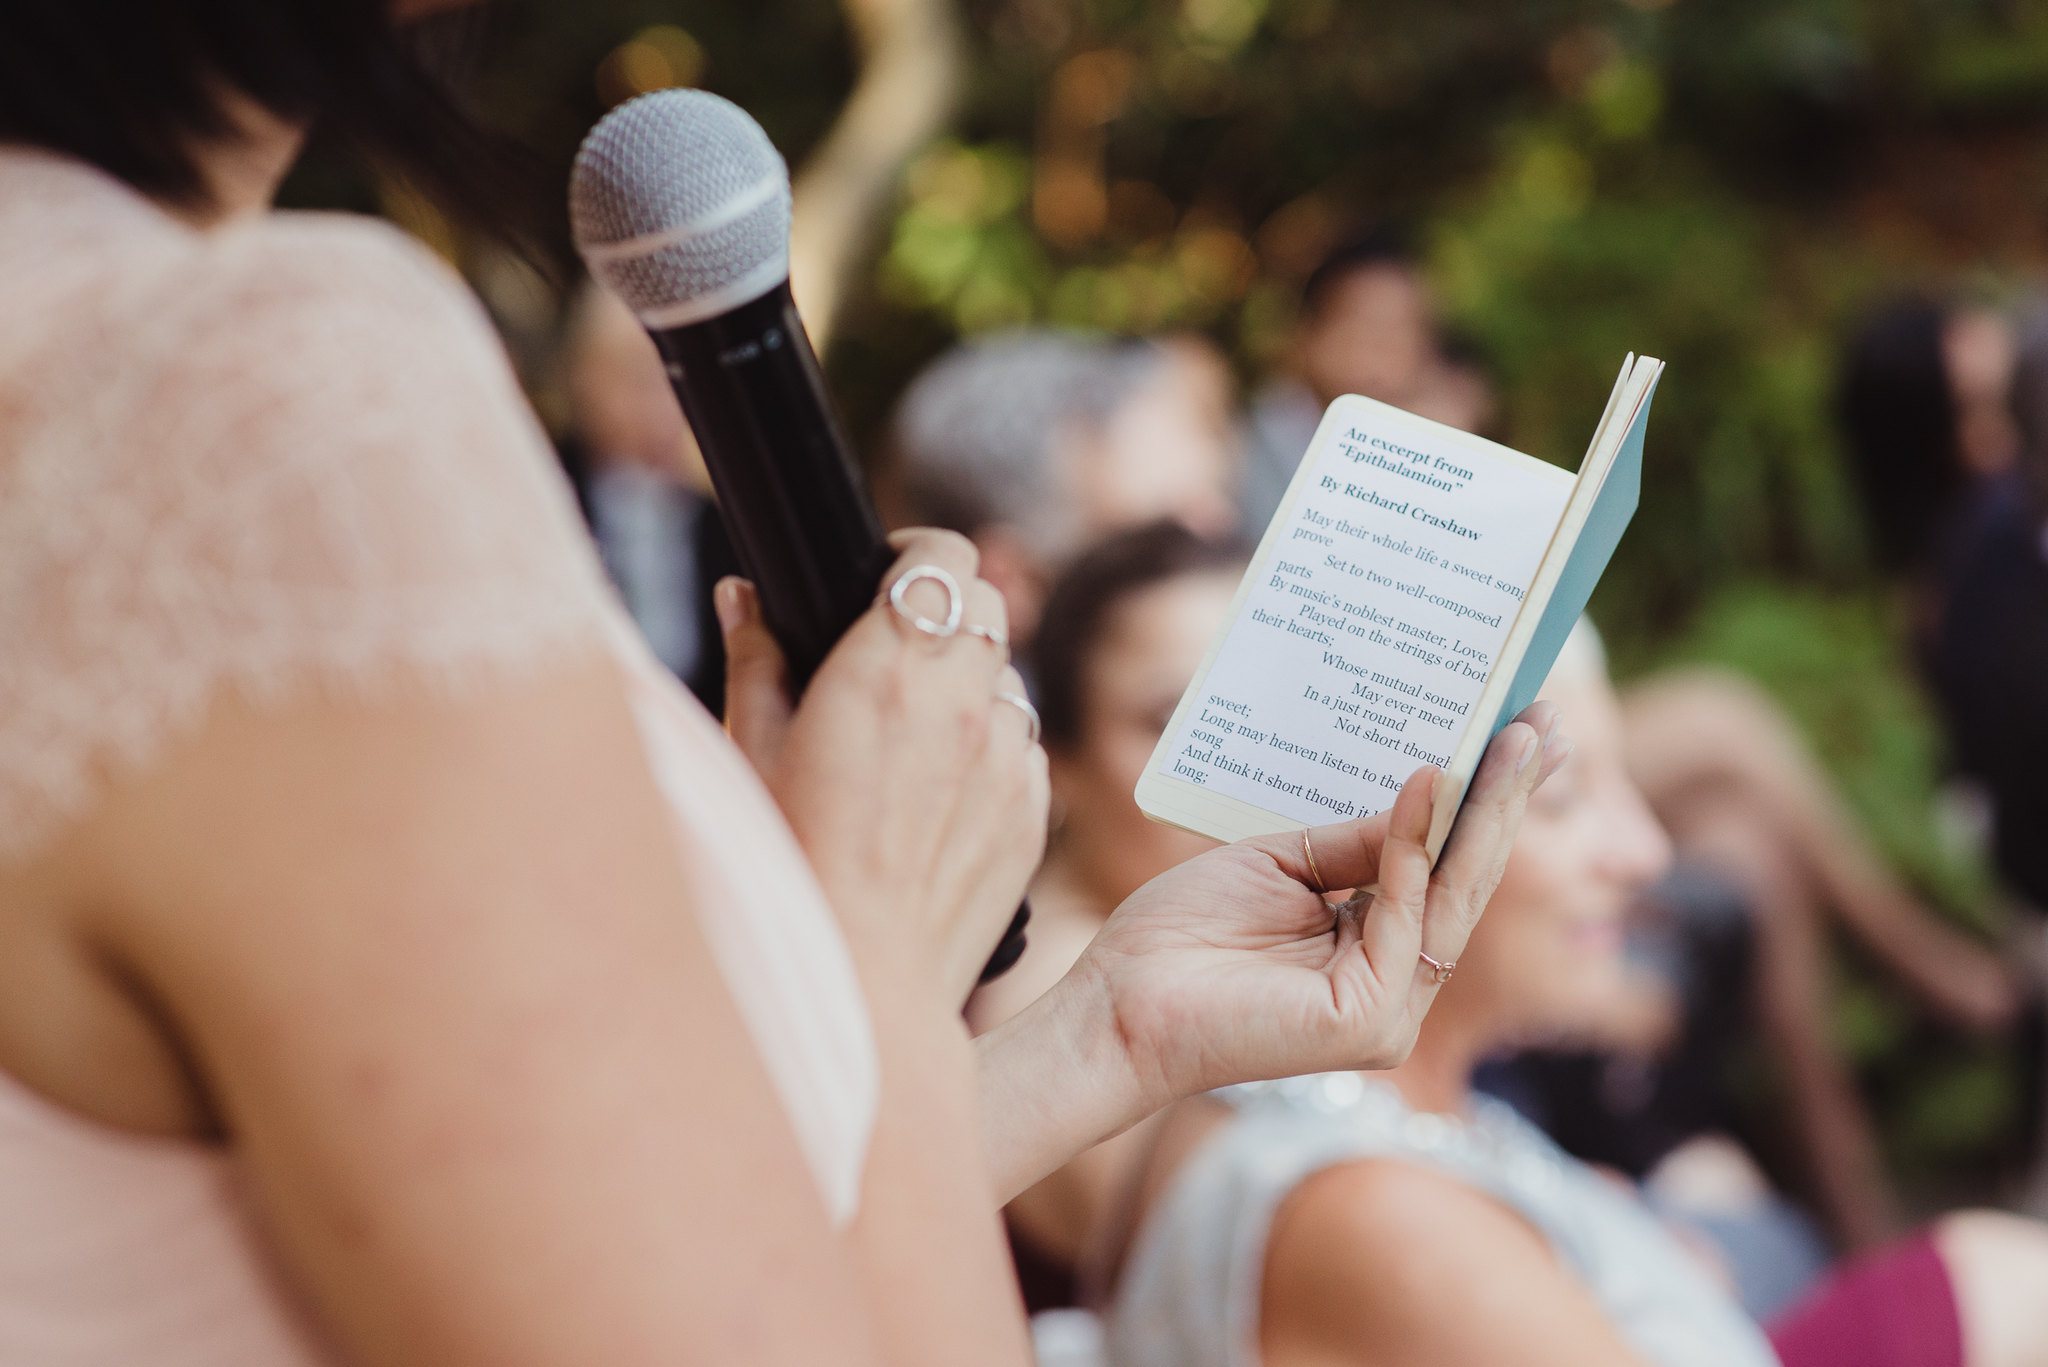 Woman holding microphone and small booklet giving maid of honor speech